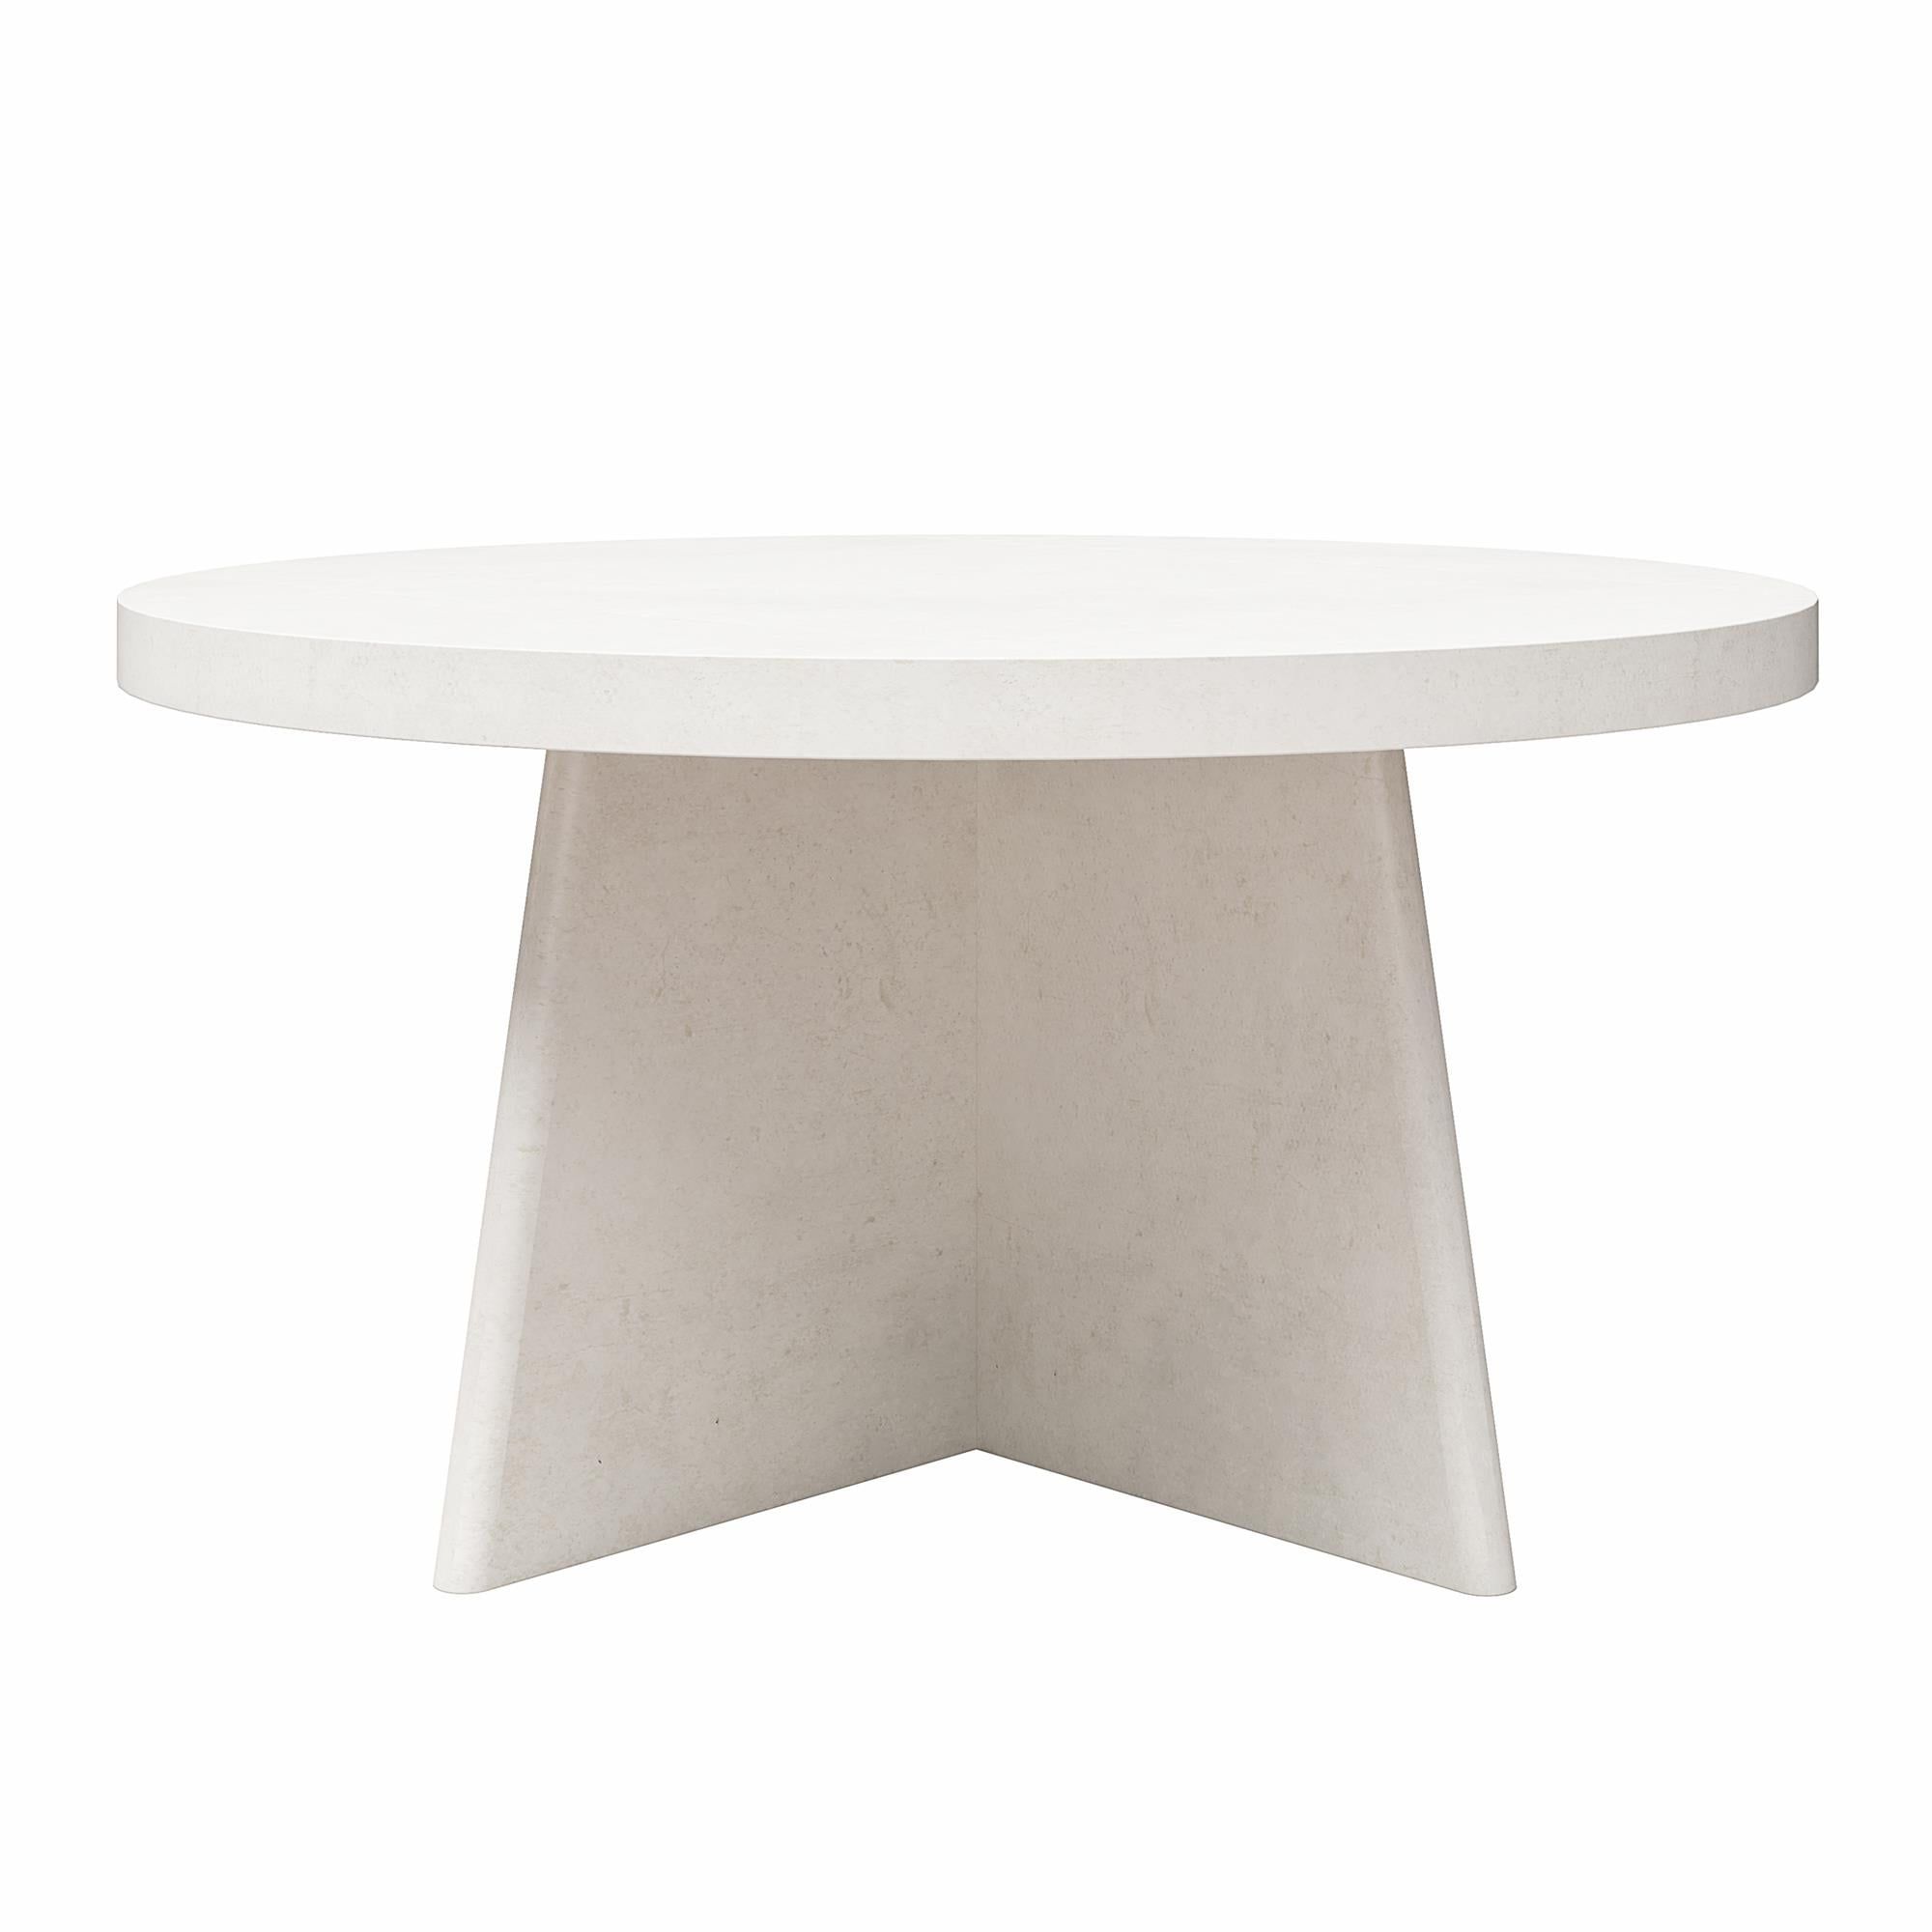 Queer Eye Liam Round Coffee Table, Plaster – Walmart Intended For Well Known Liam Round Plaster Coffee Tables (View 6 of 15)